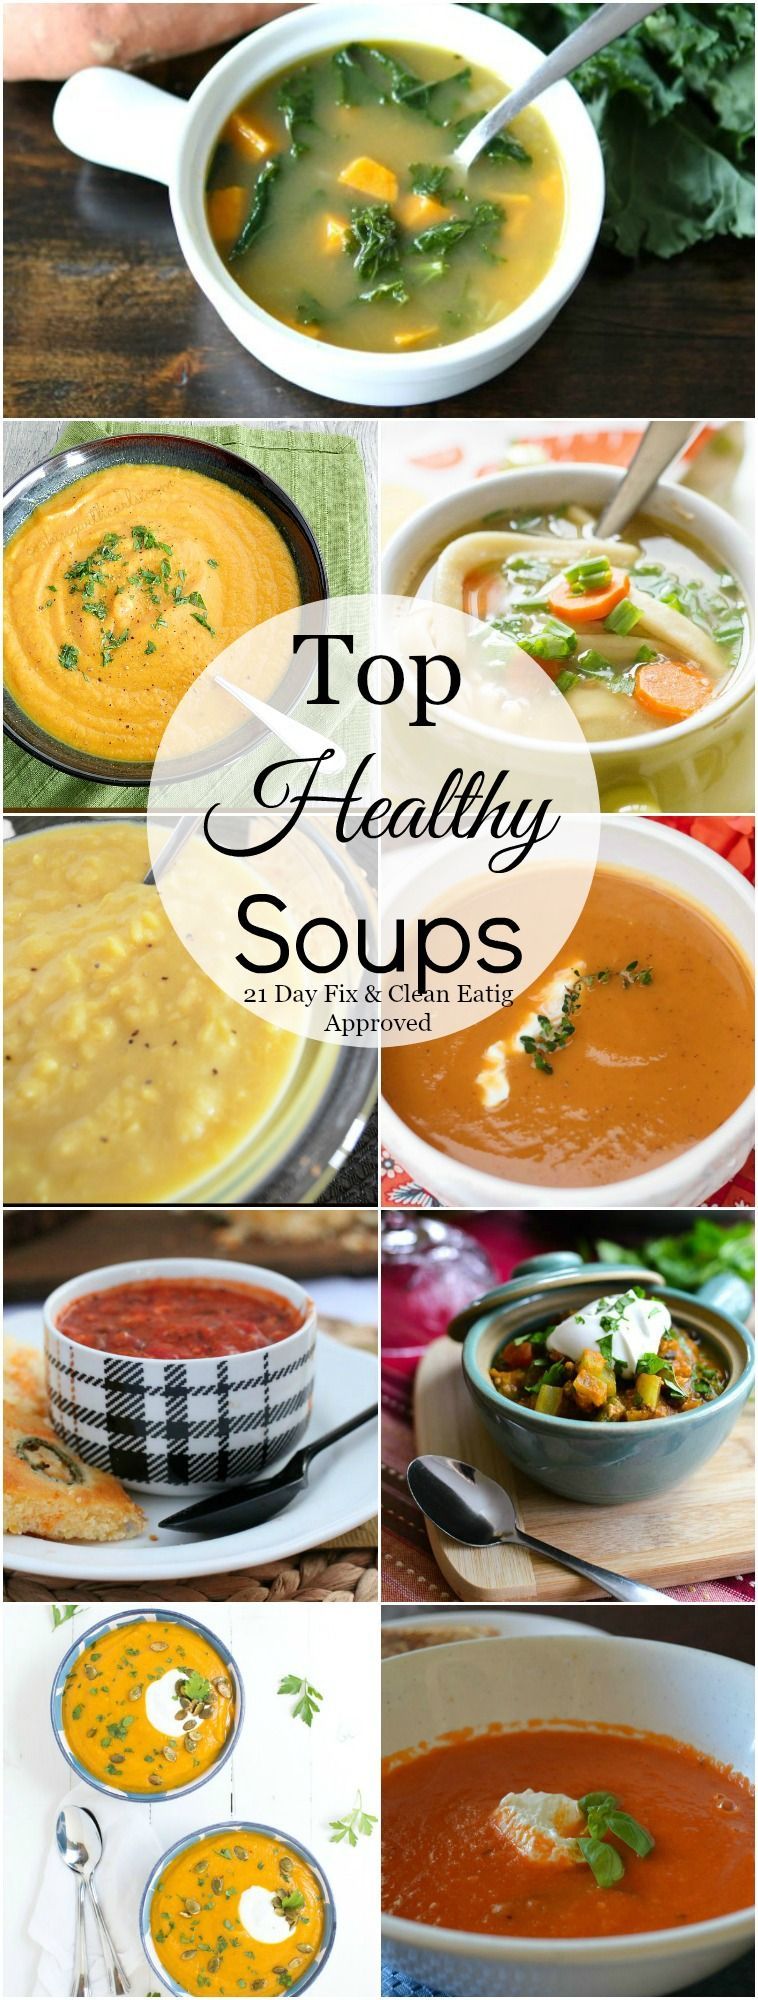 Top Healthy Soups that are 21 Day Fix & Clean Eating Approved